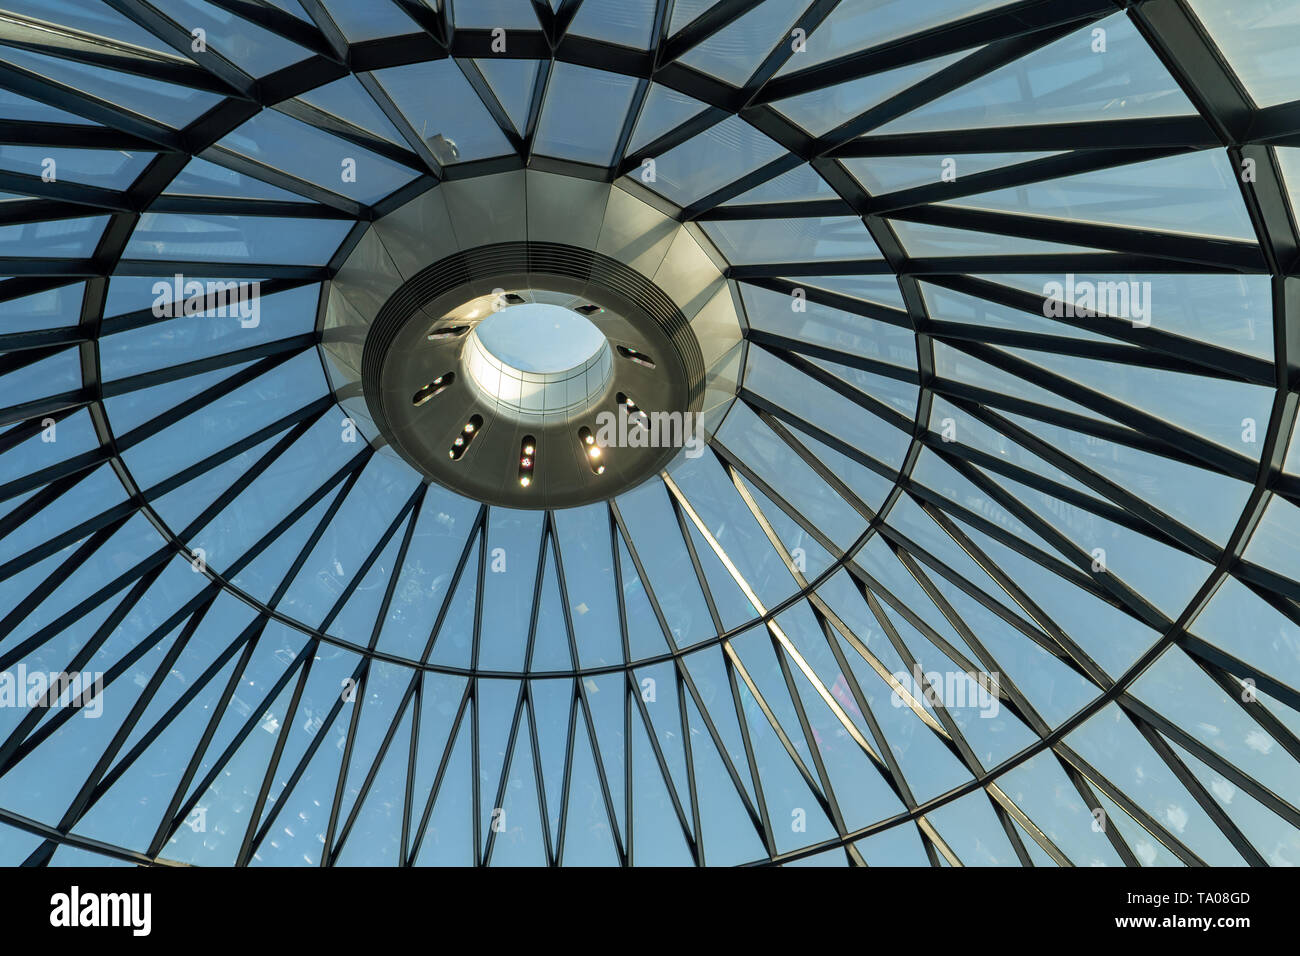 Views of the roof of the Gherkin building in London. Photo date: Tuesday, May 21, 2019. Photo: Roger Garfield/Alamy Stock Photo